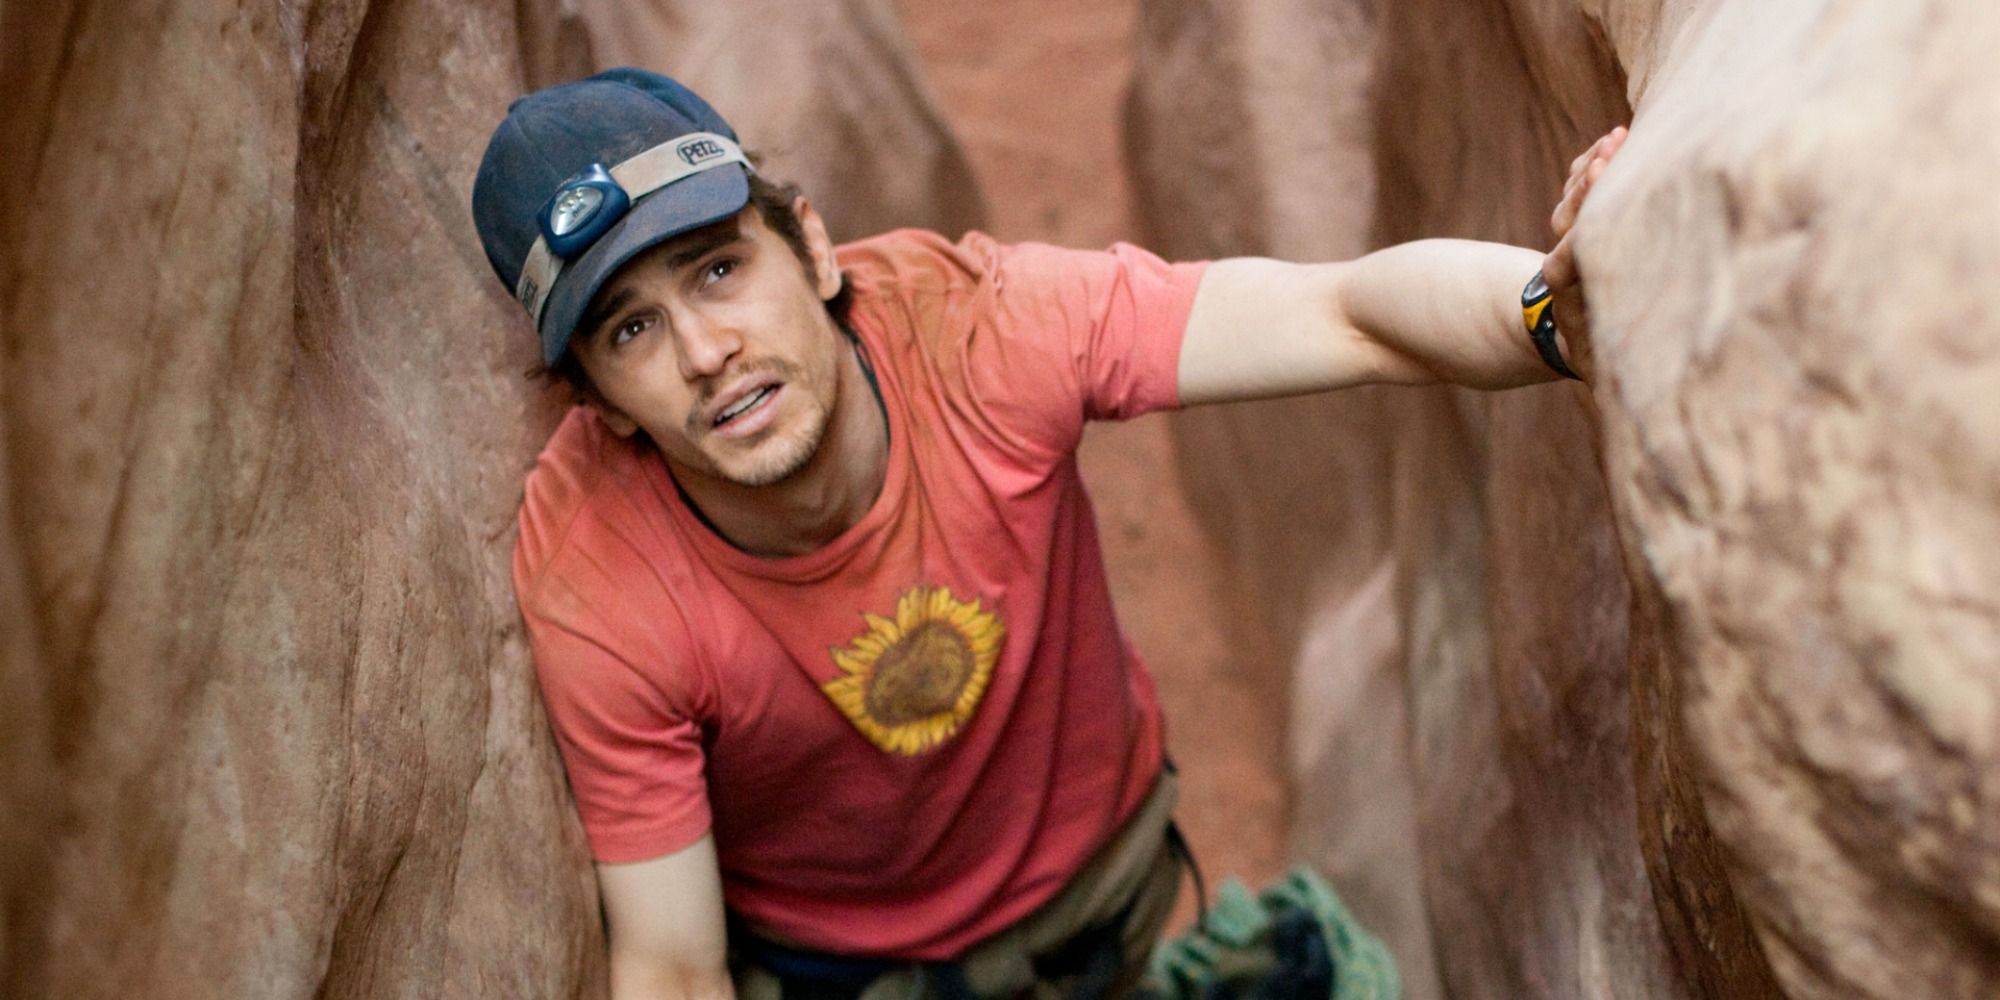 James Franco as Aron Ralston in 127 Hours